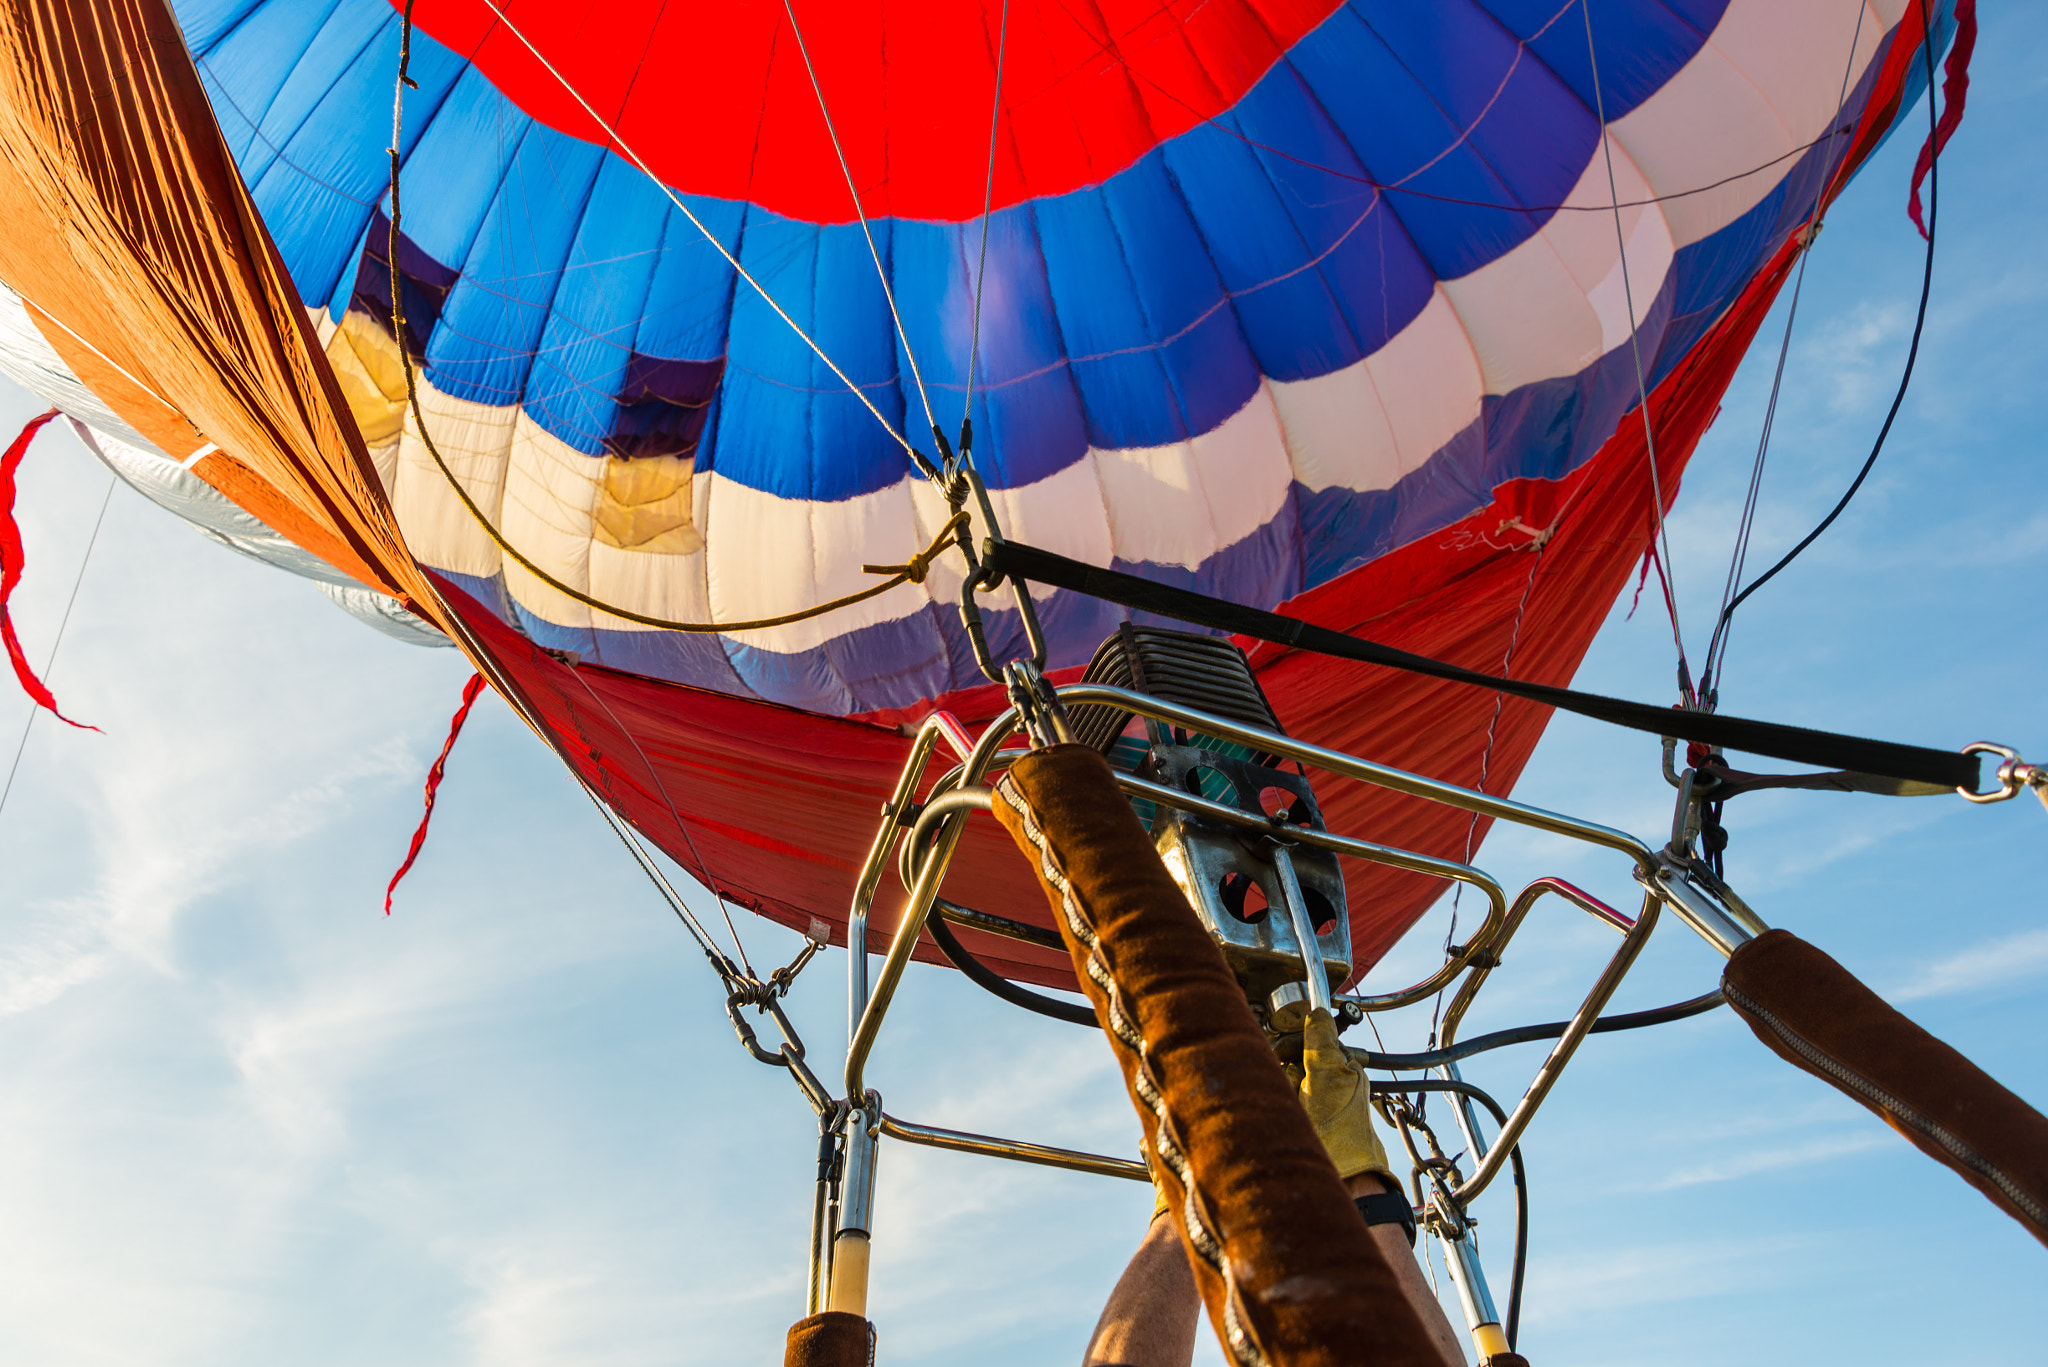 Nikon D600 sample photo. A fine day for ballooning photography